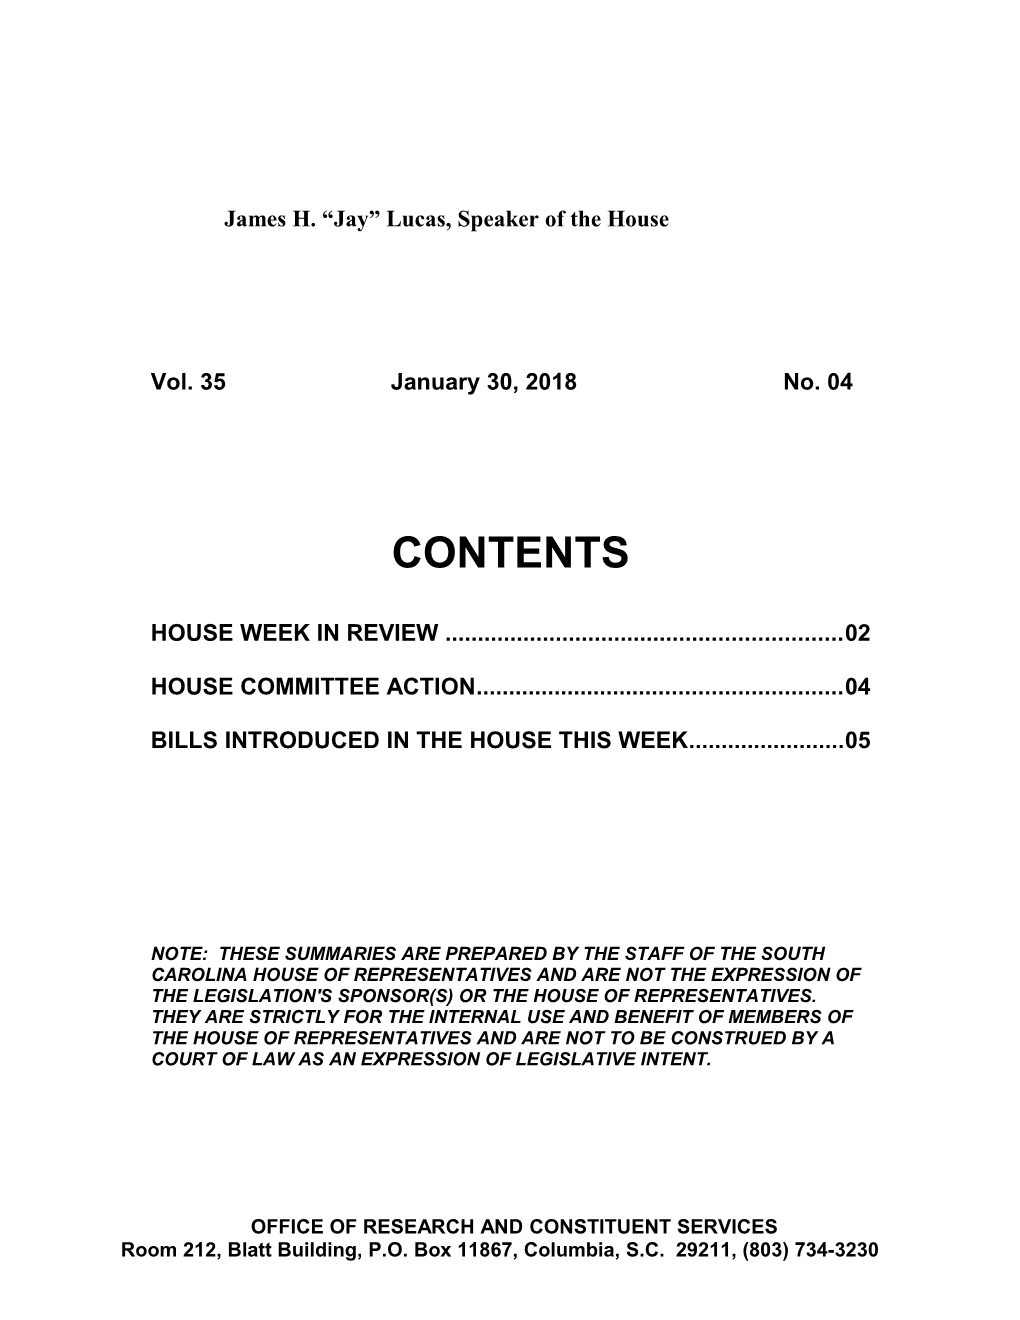 Bills Introduced in the House This Week 05